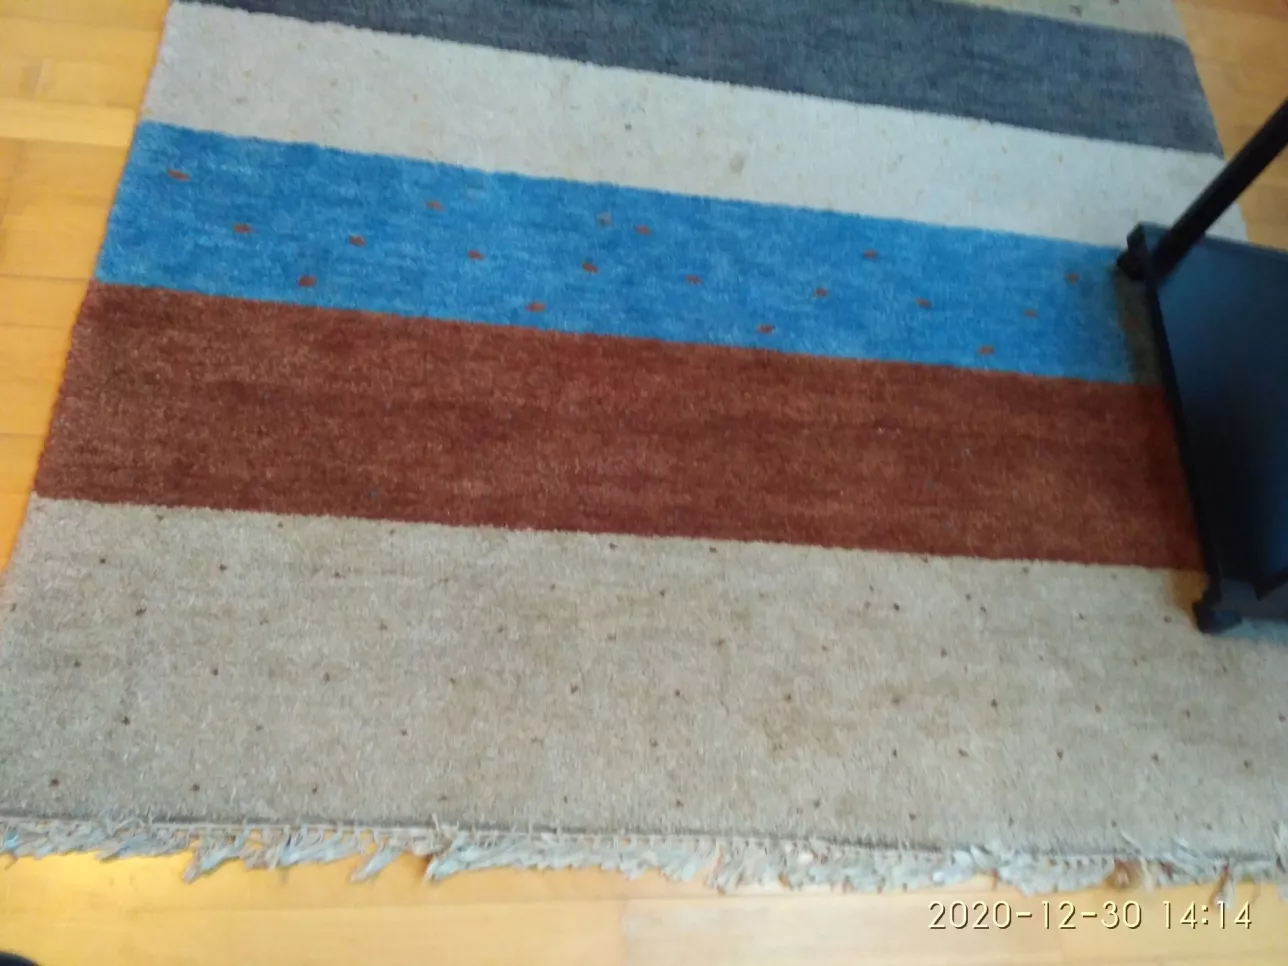 A slightly dirty rug with multicoloured bands. Photo: Tenant